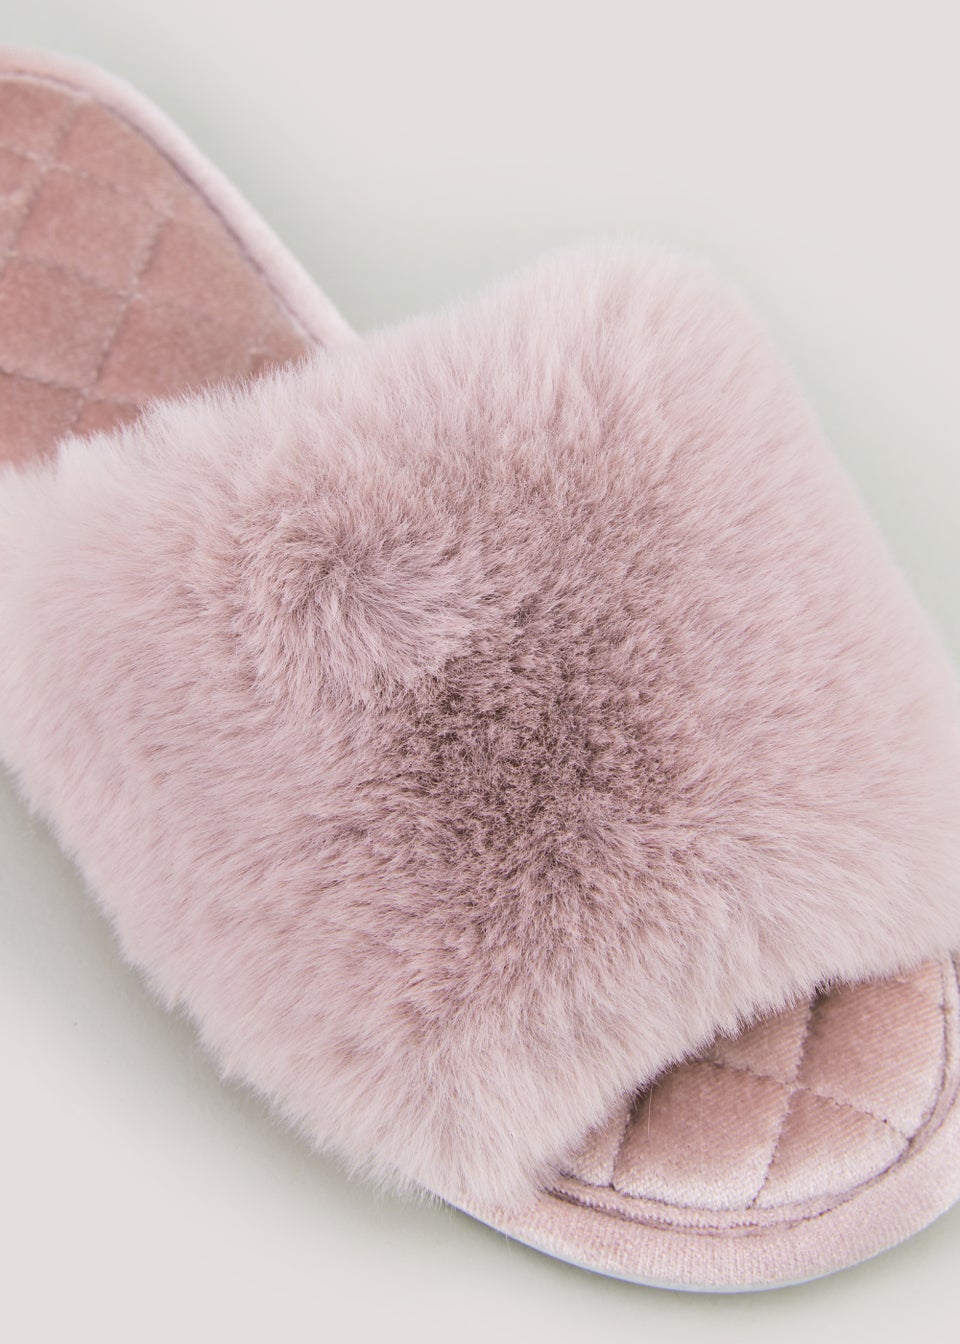 Faux Fur Slippers Shoes | Faux Fur Home Slippers | Women's Home Slippers -  Slippers - Aliexpress